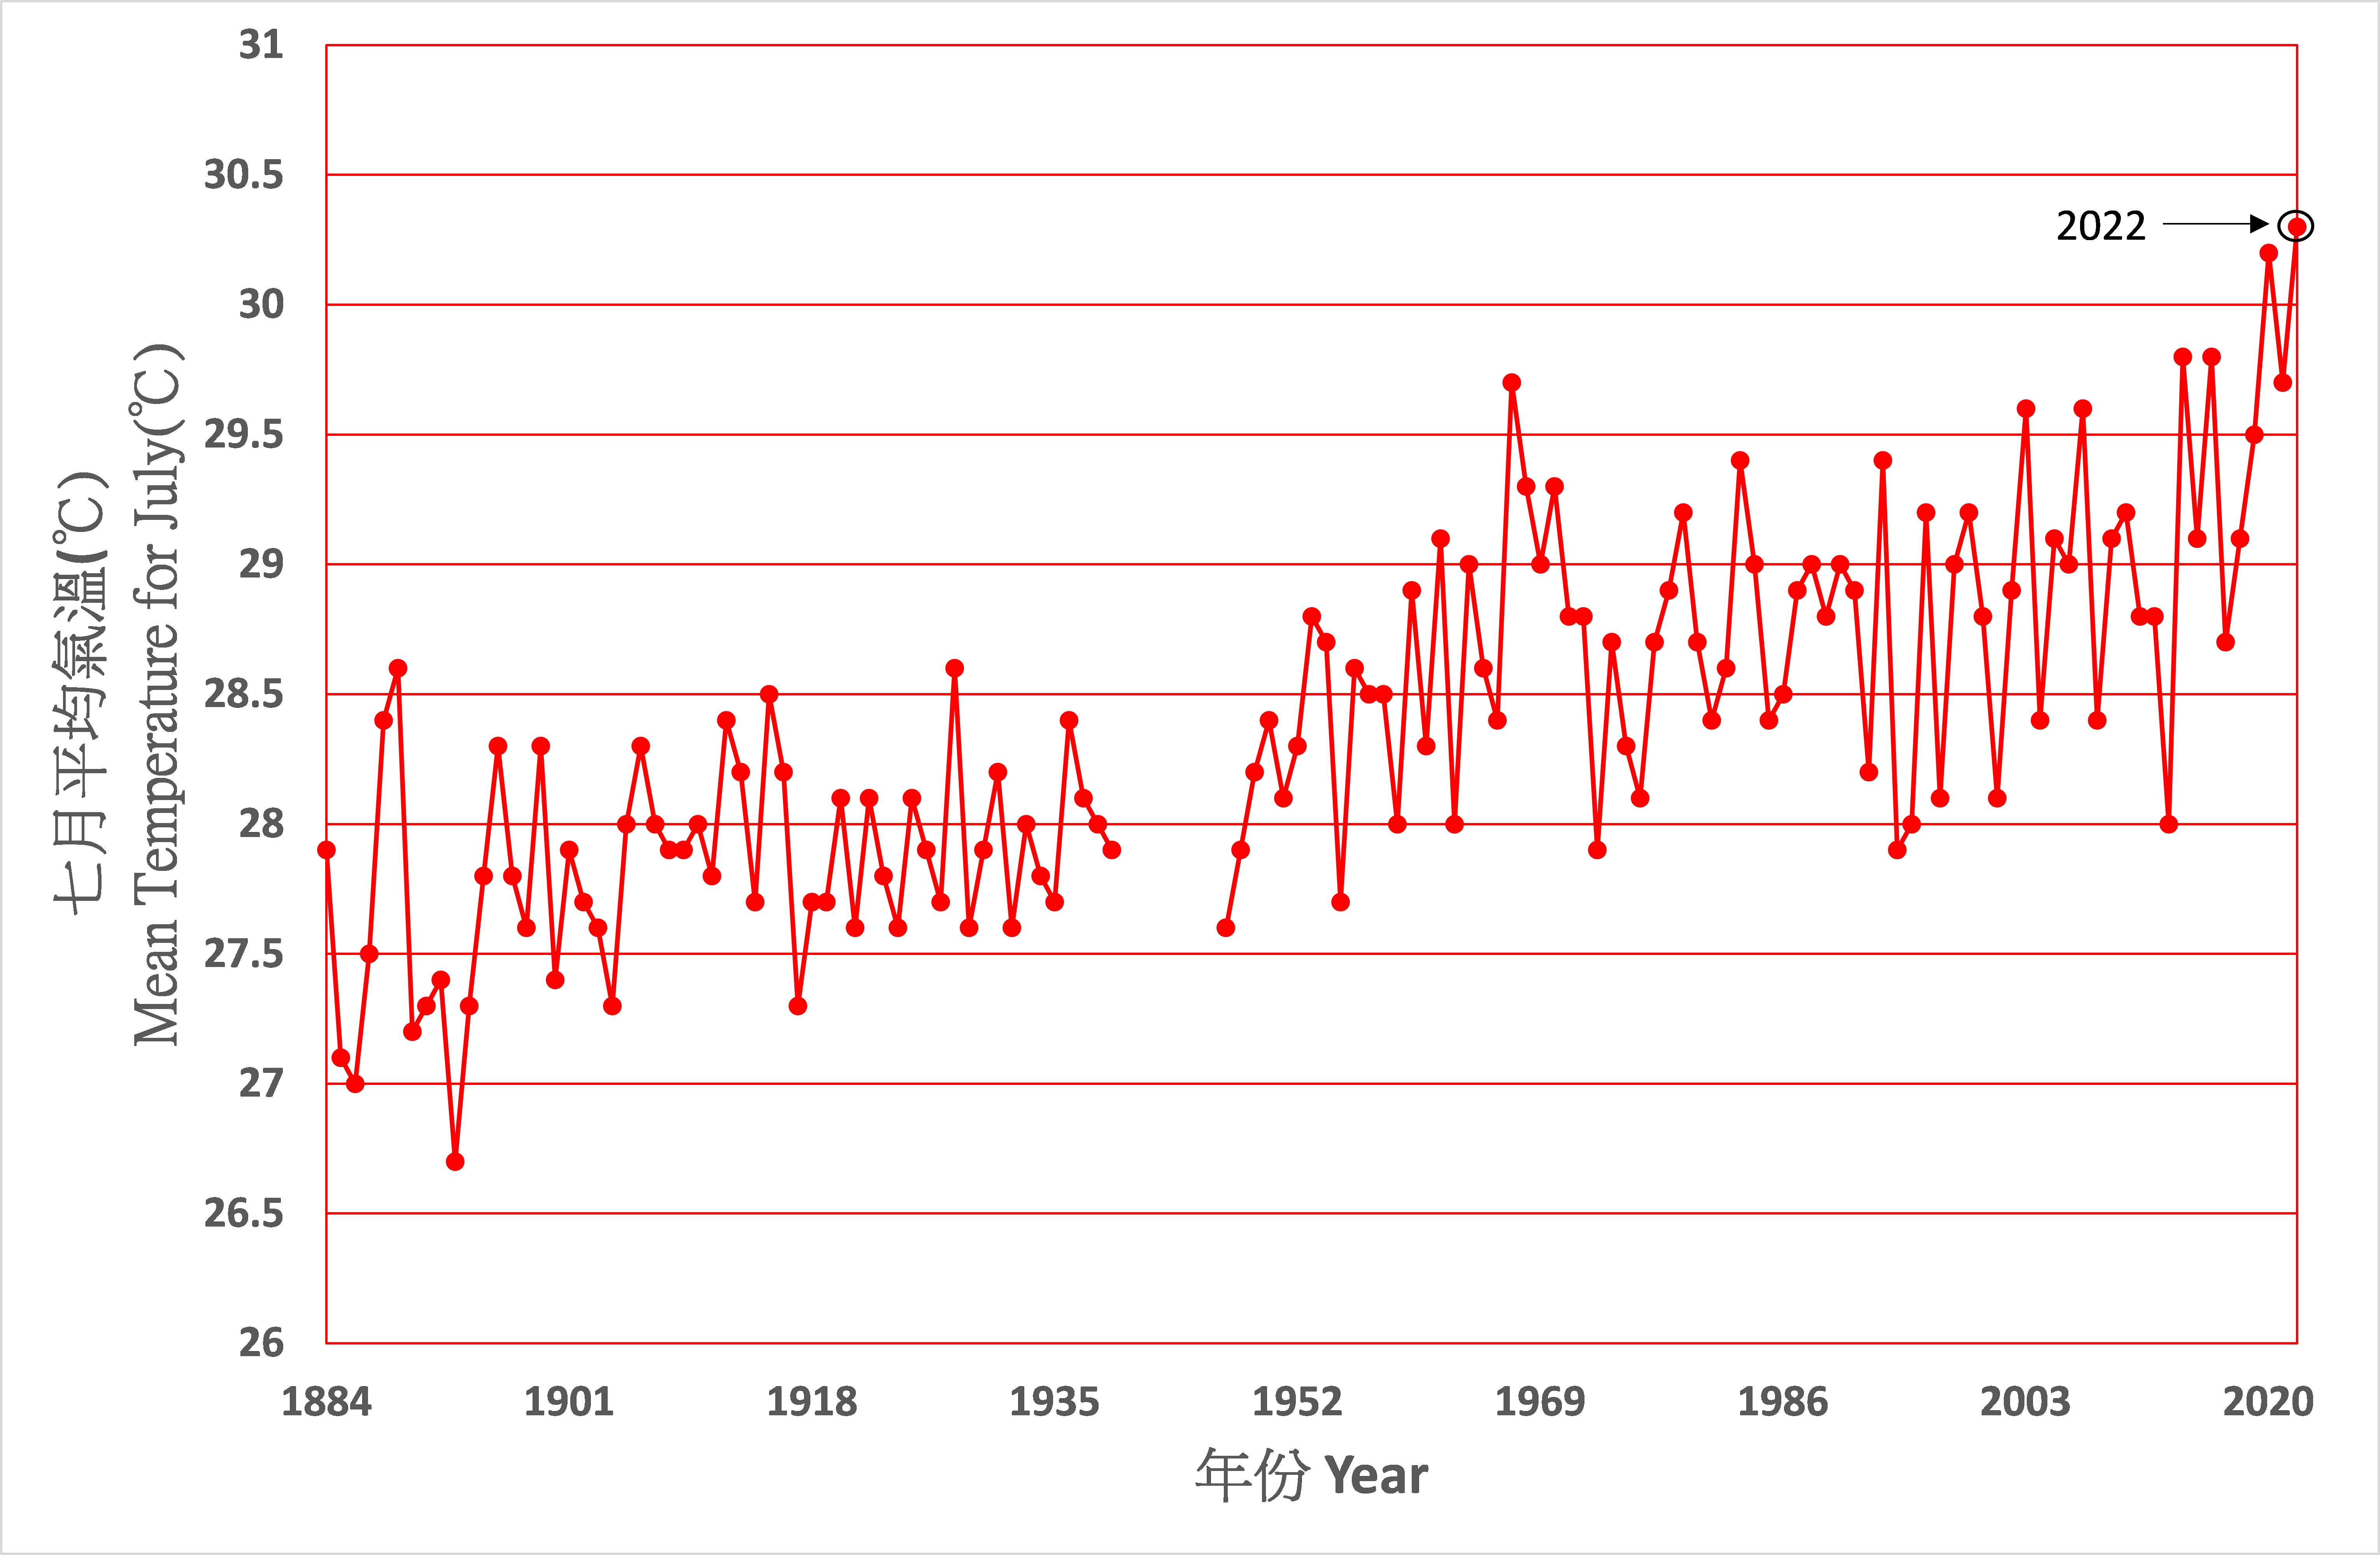 Long-term time series of July mean temperature in Hong Kong